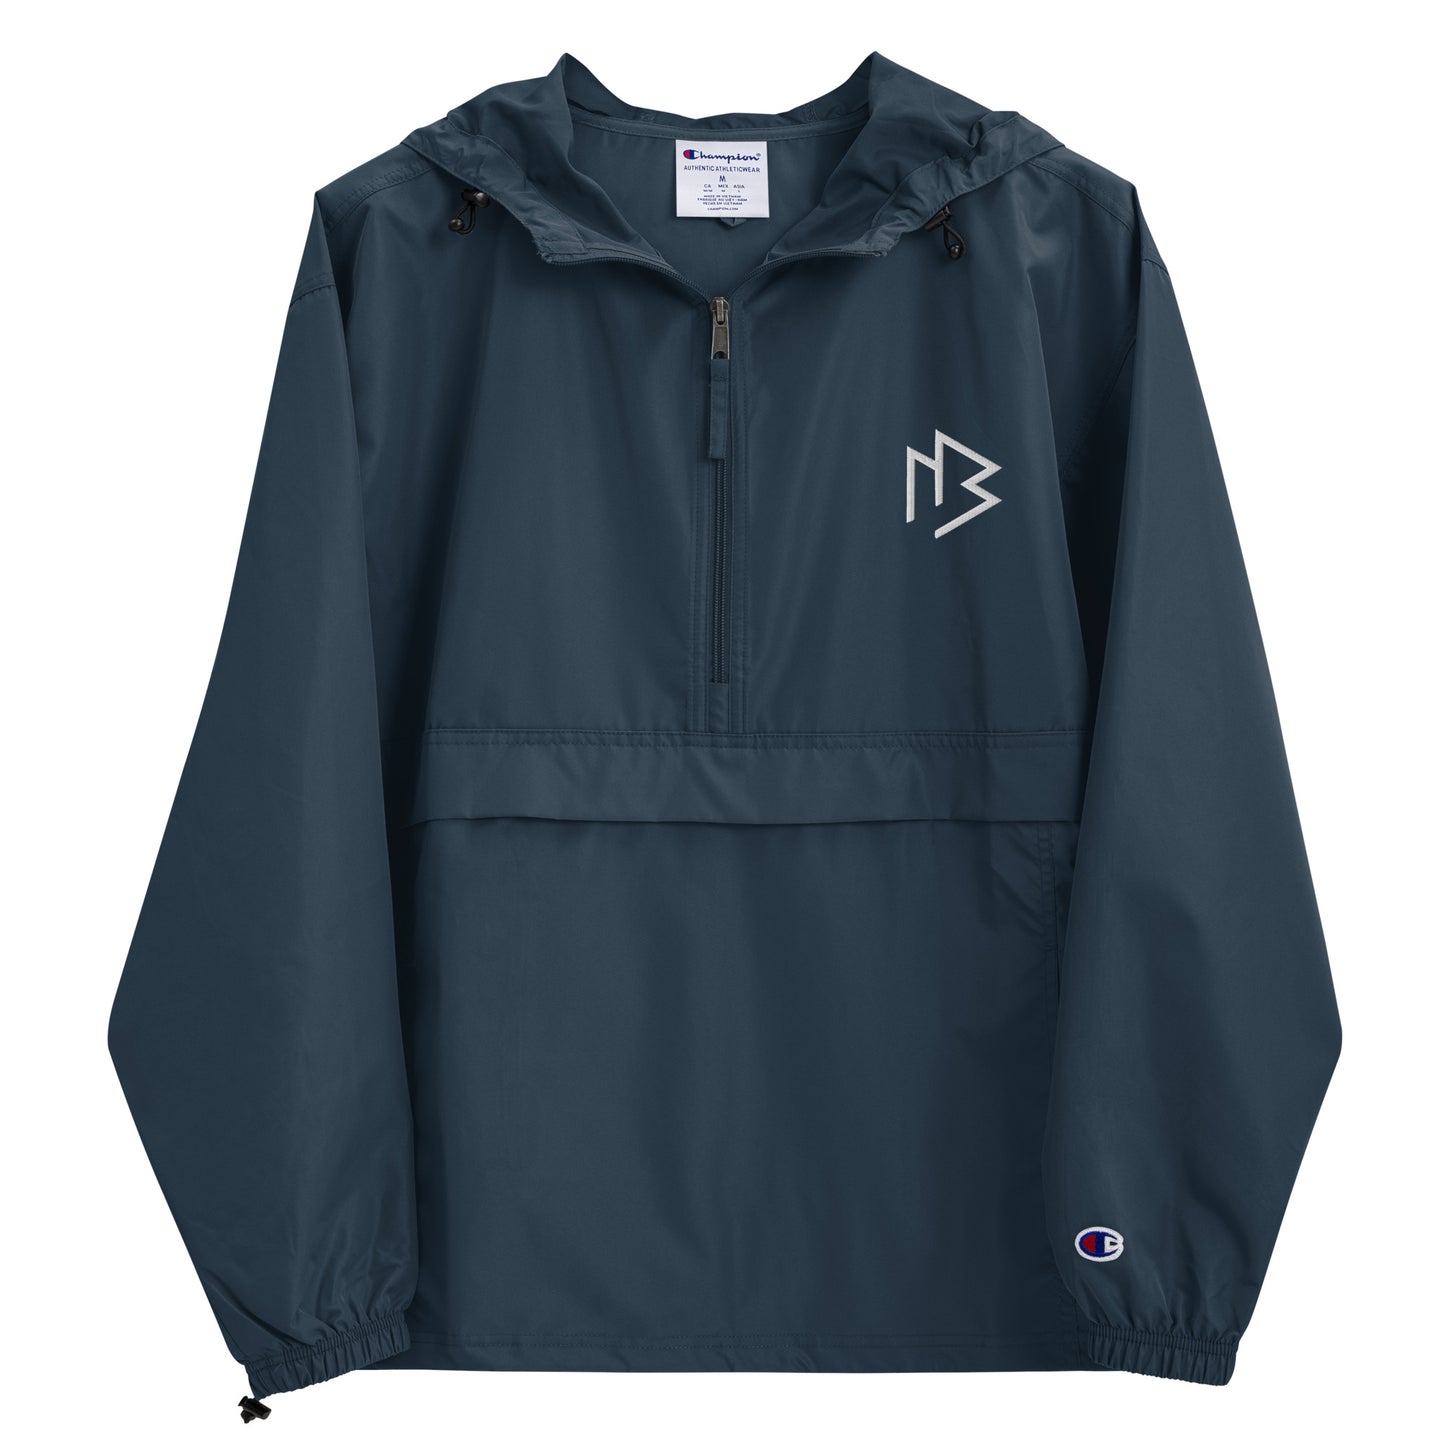 White Logo Packable Jacket